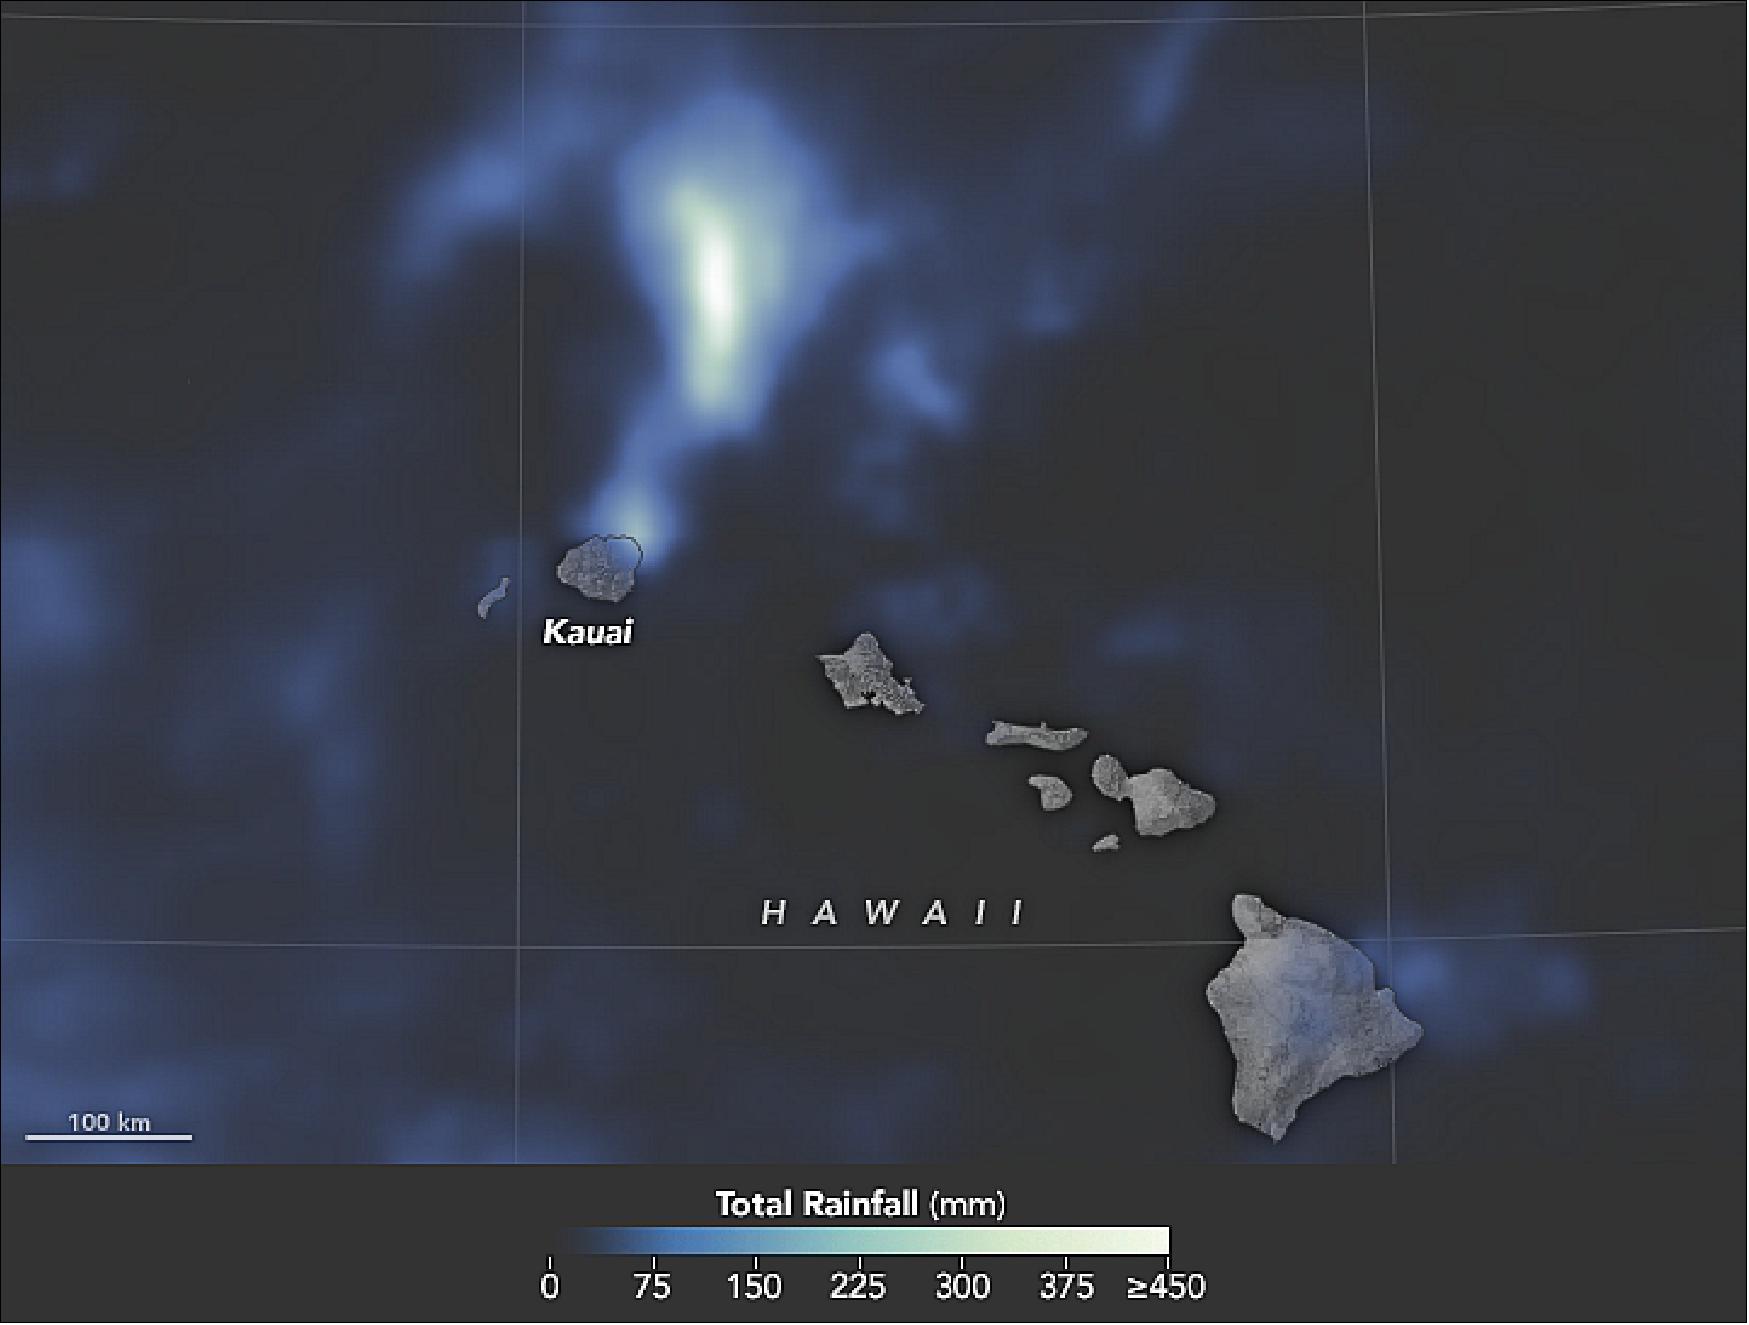 Figure 36: This map shows rainfall accumulation over the Kauai area from April 12 to April 19. These rainfall data are remotely–sensed estimates that come from the Integrated Multi-Satellite Retrievals for GPM (IMERG), a product of the Global Precipitation Measurement mission (image credit: NASA Earth Observatory, image by Joshua Stevens, using IMERG data from the Global Precipitation Mission (GPM) at NASA/GSFC, story by Kasha Patel)